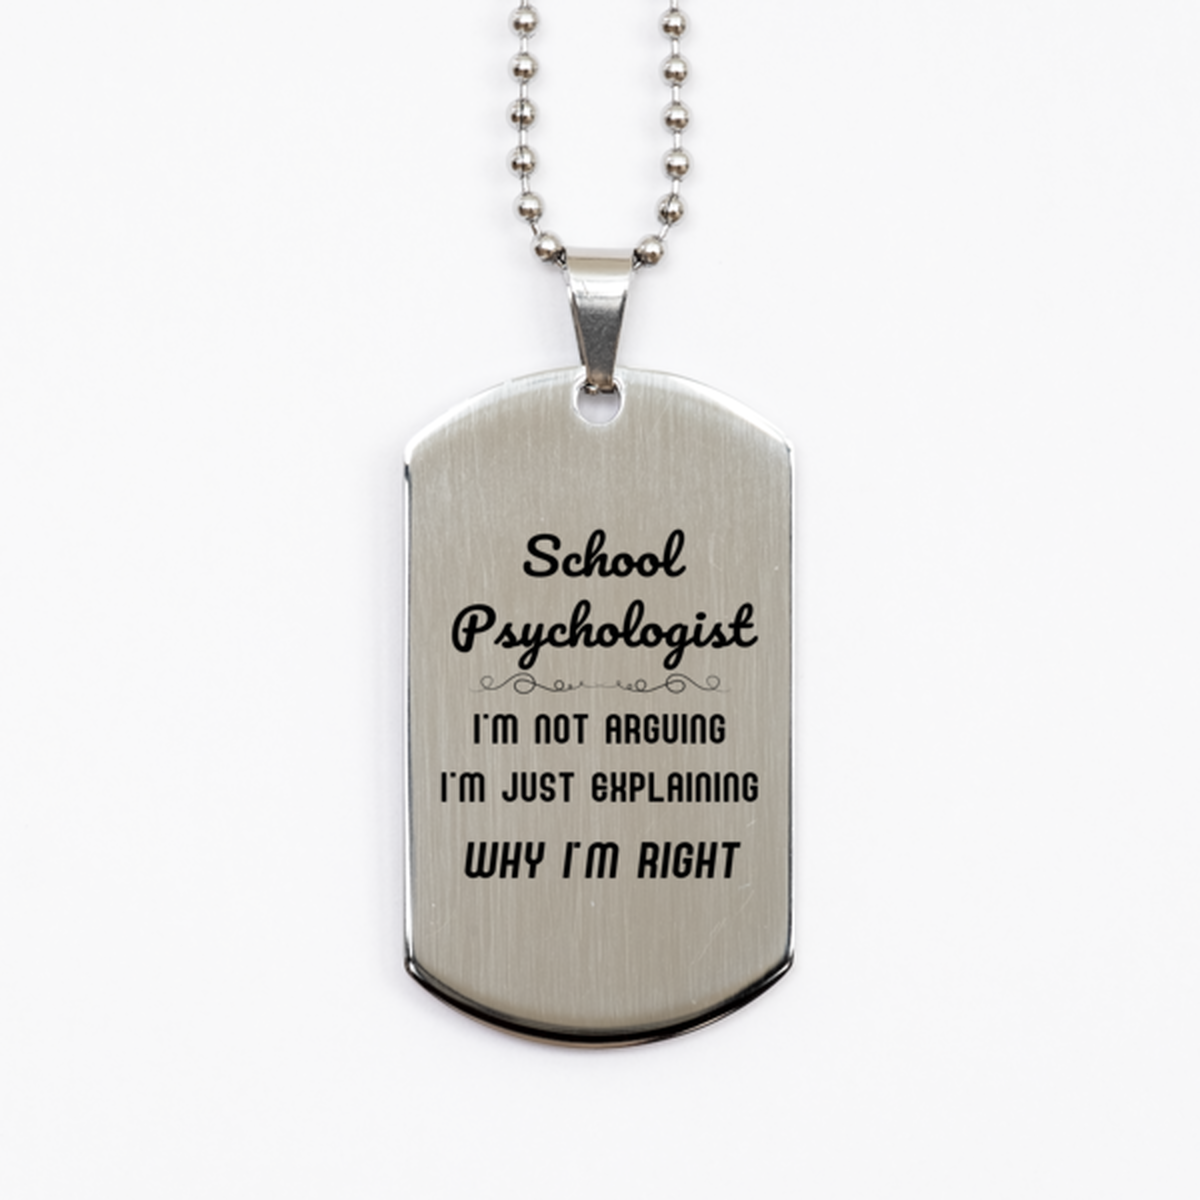 School Psychologist I'm not Arguing. I'm Just Explaining Why I'm RIGHT Silver Dog Tag, Funny Saying Quote School Psychologist Gifts For School Psychologist Graduation Birthday Christmas Gifts for Men Women Coworker